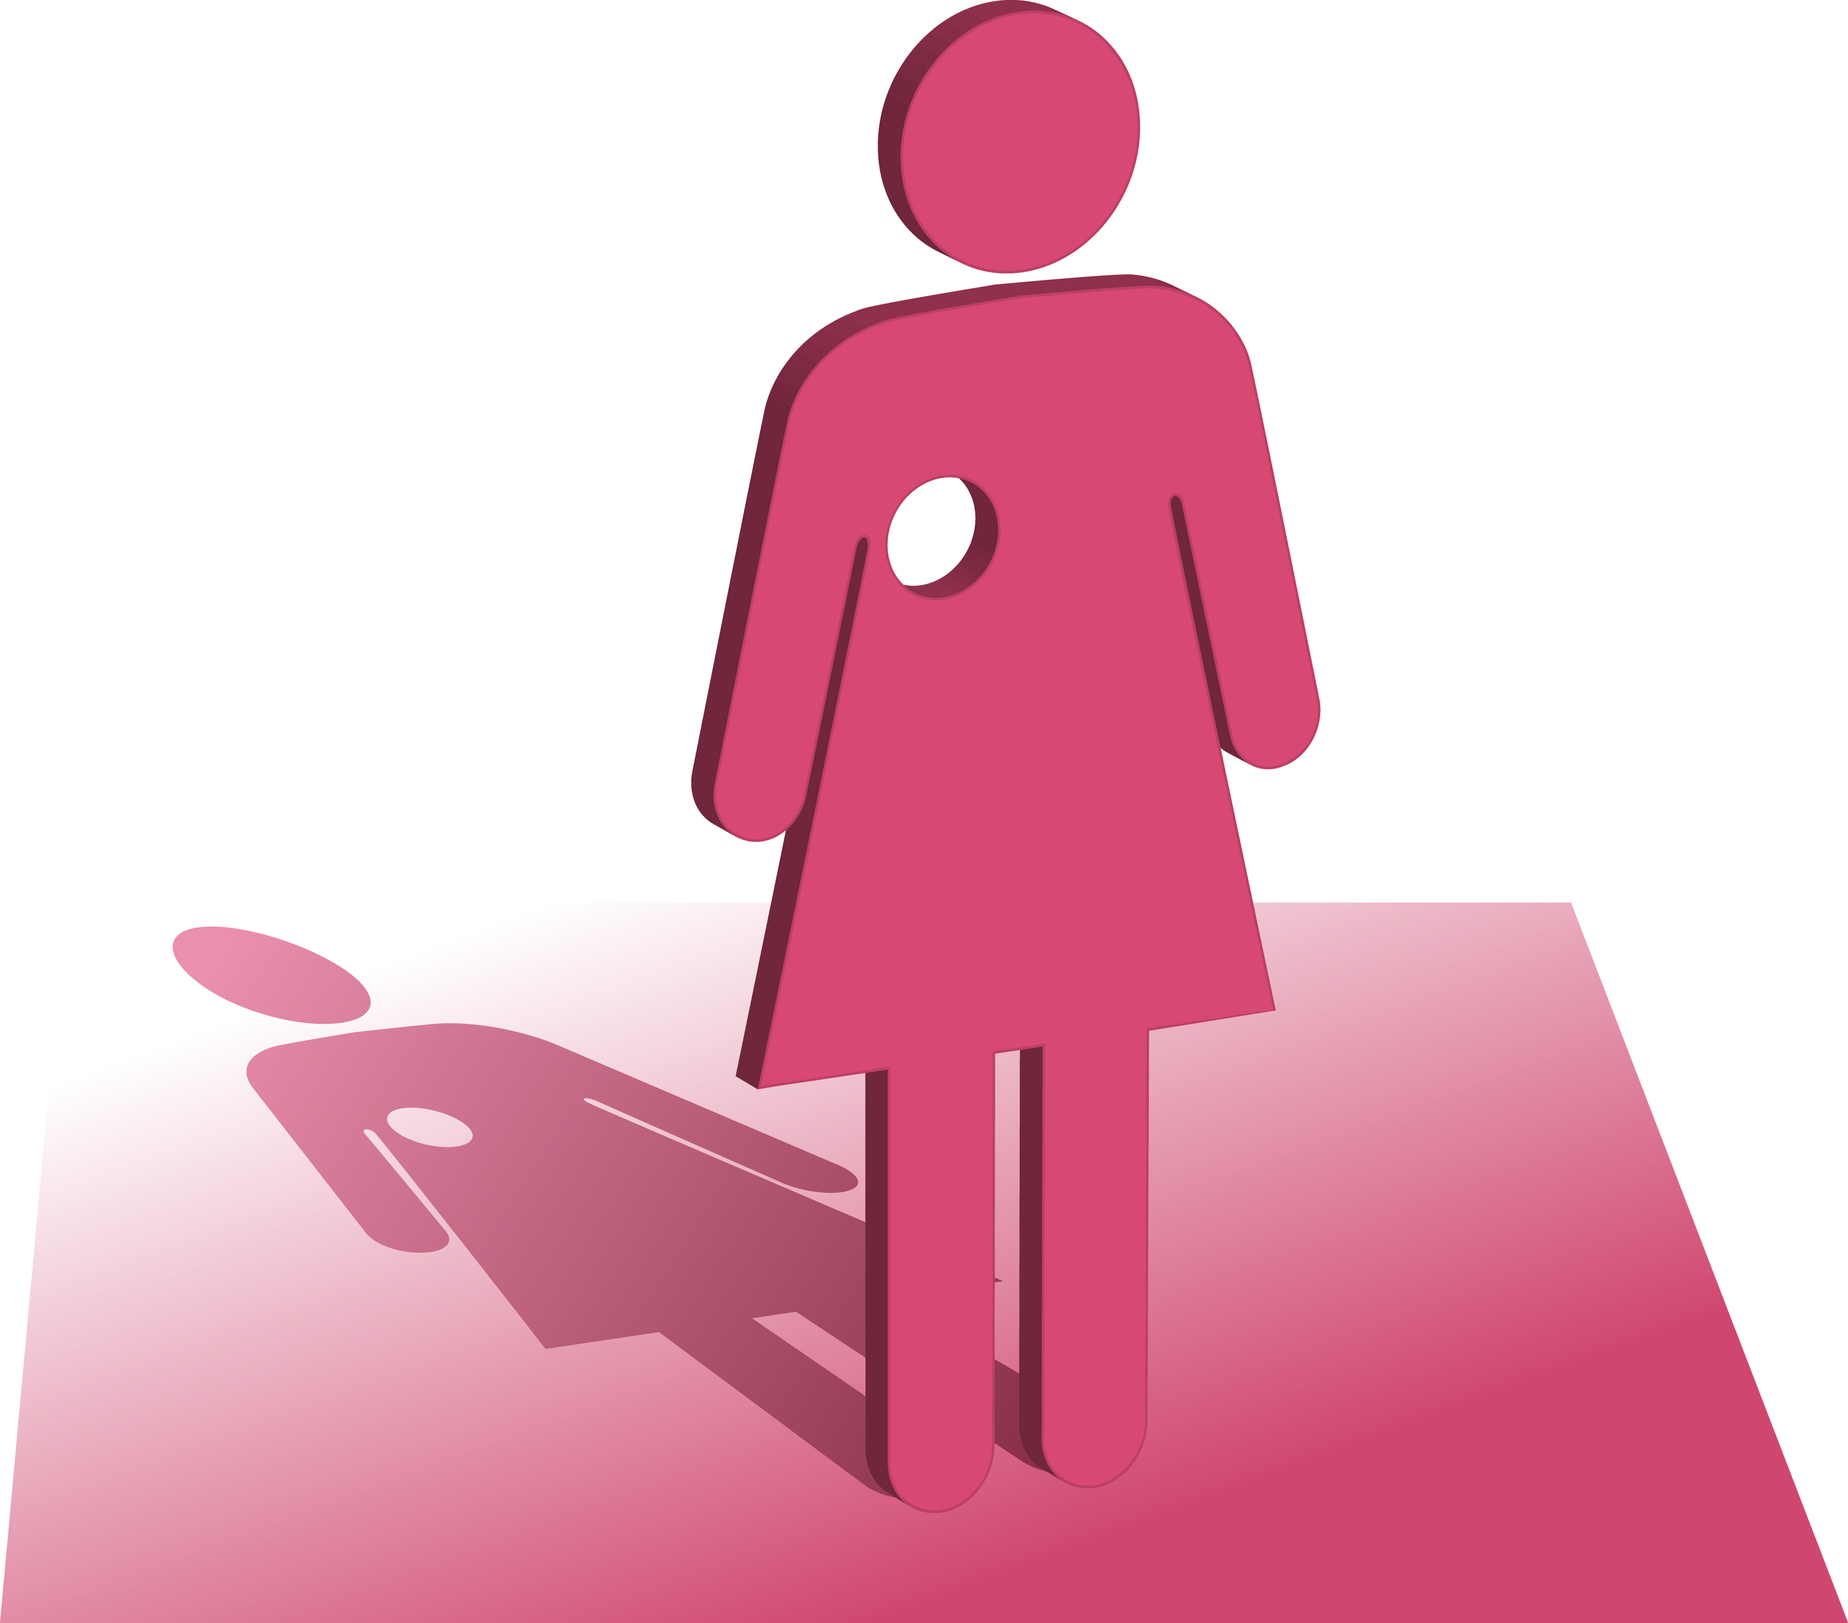 Pink silhouette of a woman with a circular hole for a breast - signifying mastectomy